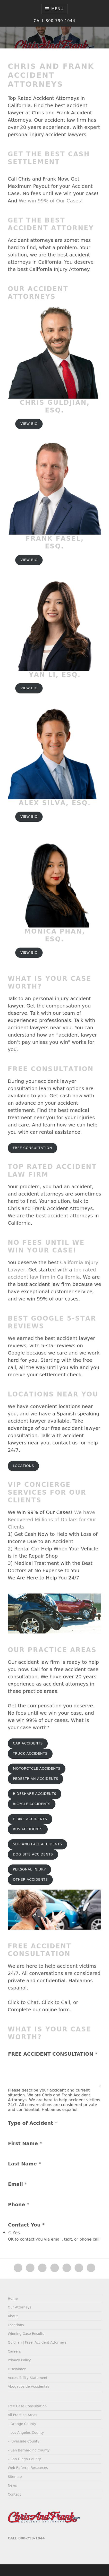 Chris and Frank Accident Attorneys - Costa Mesa CA Lawyers